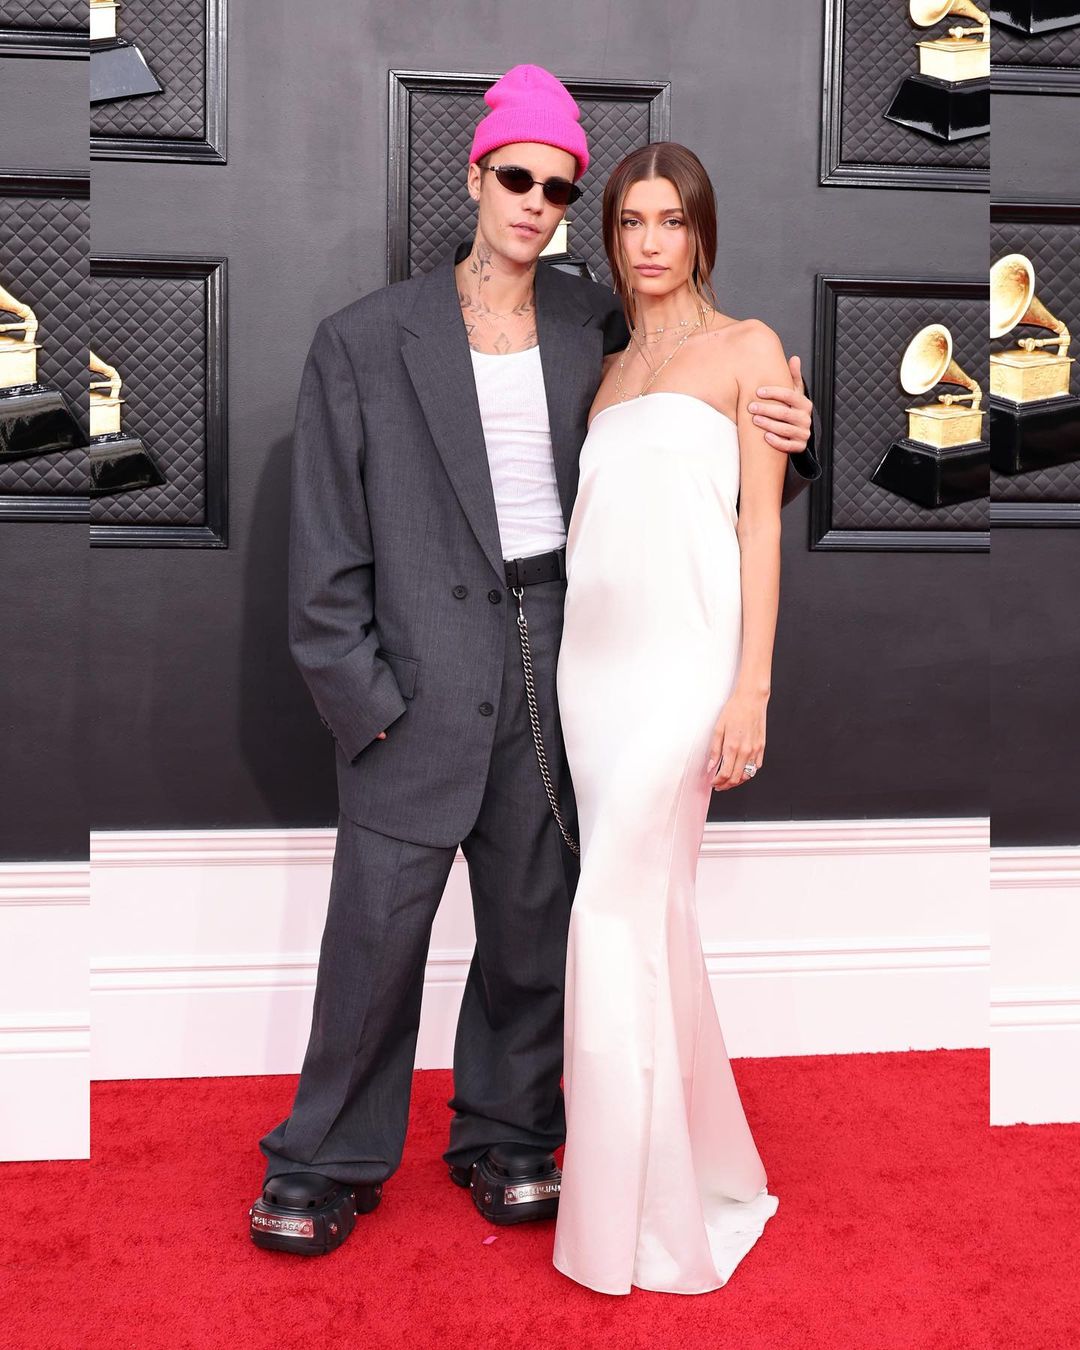 Justin Bieber kept it stylish in an oversized Balenciaga suit while his wife Hailey Bieber looked sexy in the off-shoulder white dress by YSL.